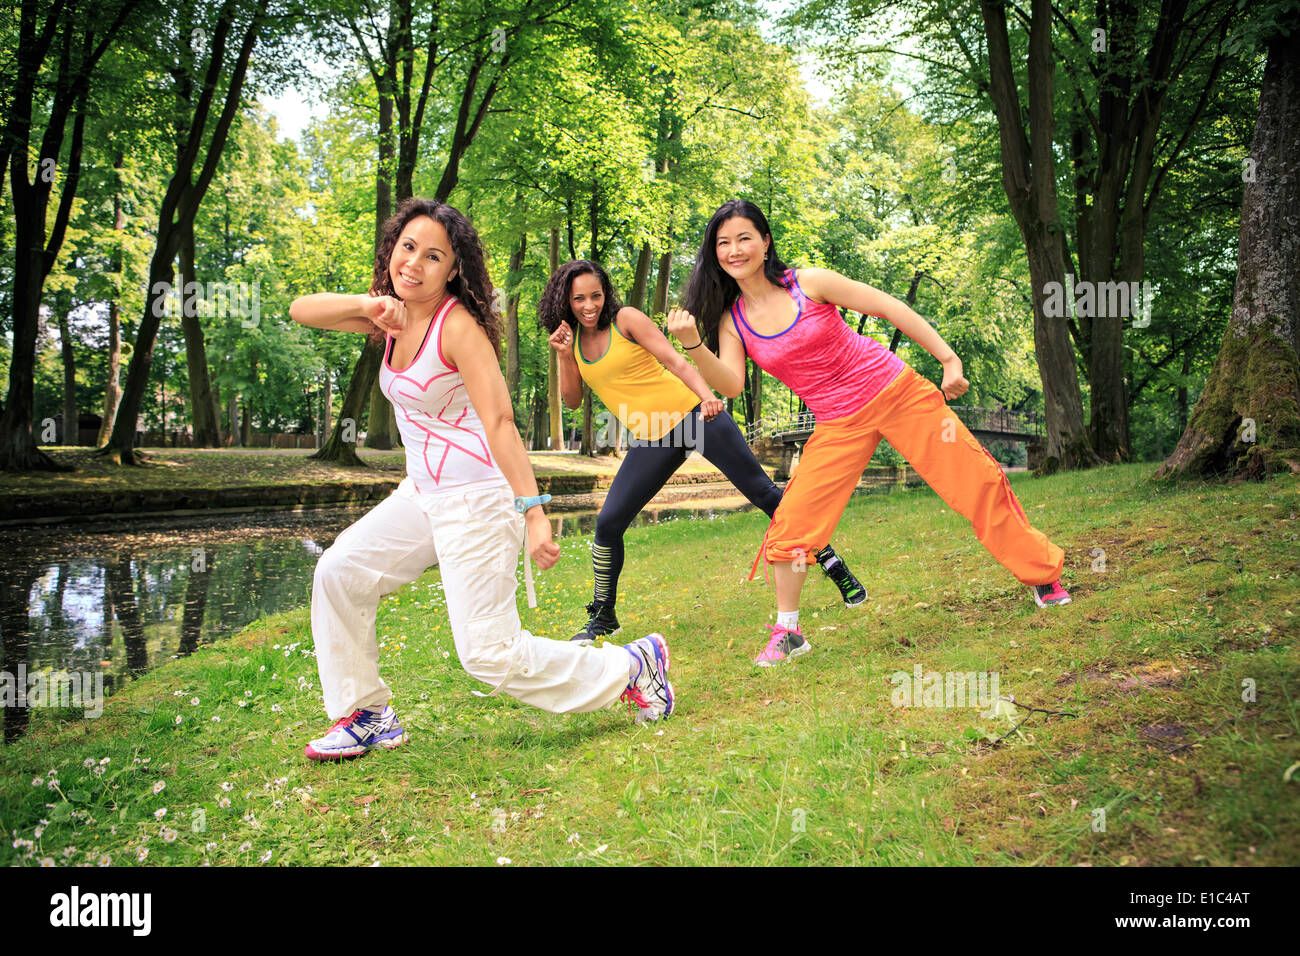 group of women dancing fitness dance zumba or aerobics in an old park Stock Photo